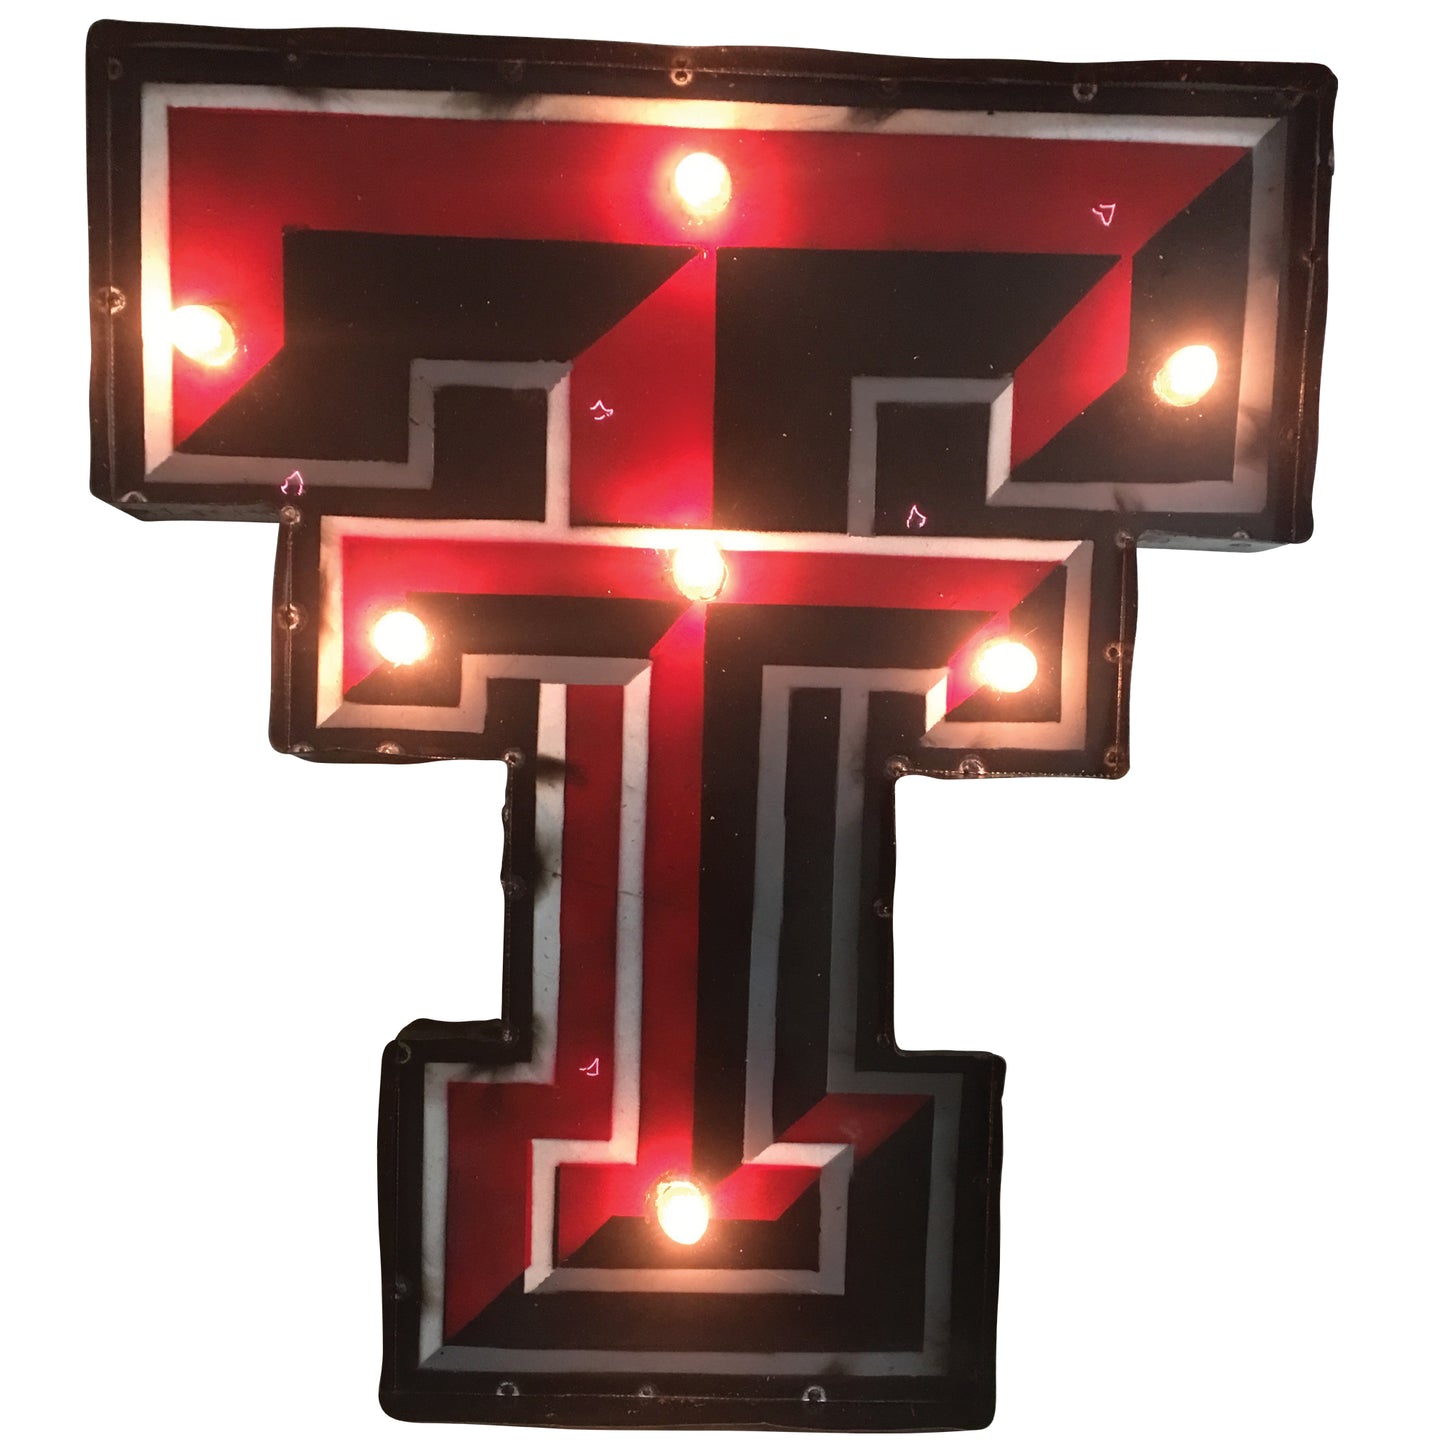 TEXAS TECH DOUBLE T ILLUMINATED MULTI COLOR RECYCLED METAL WALL DECOR